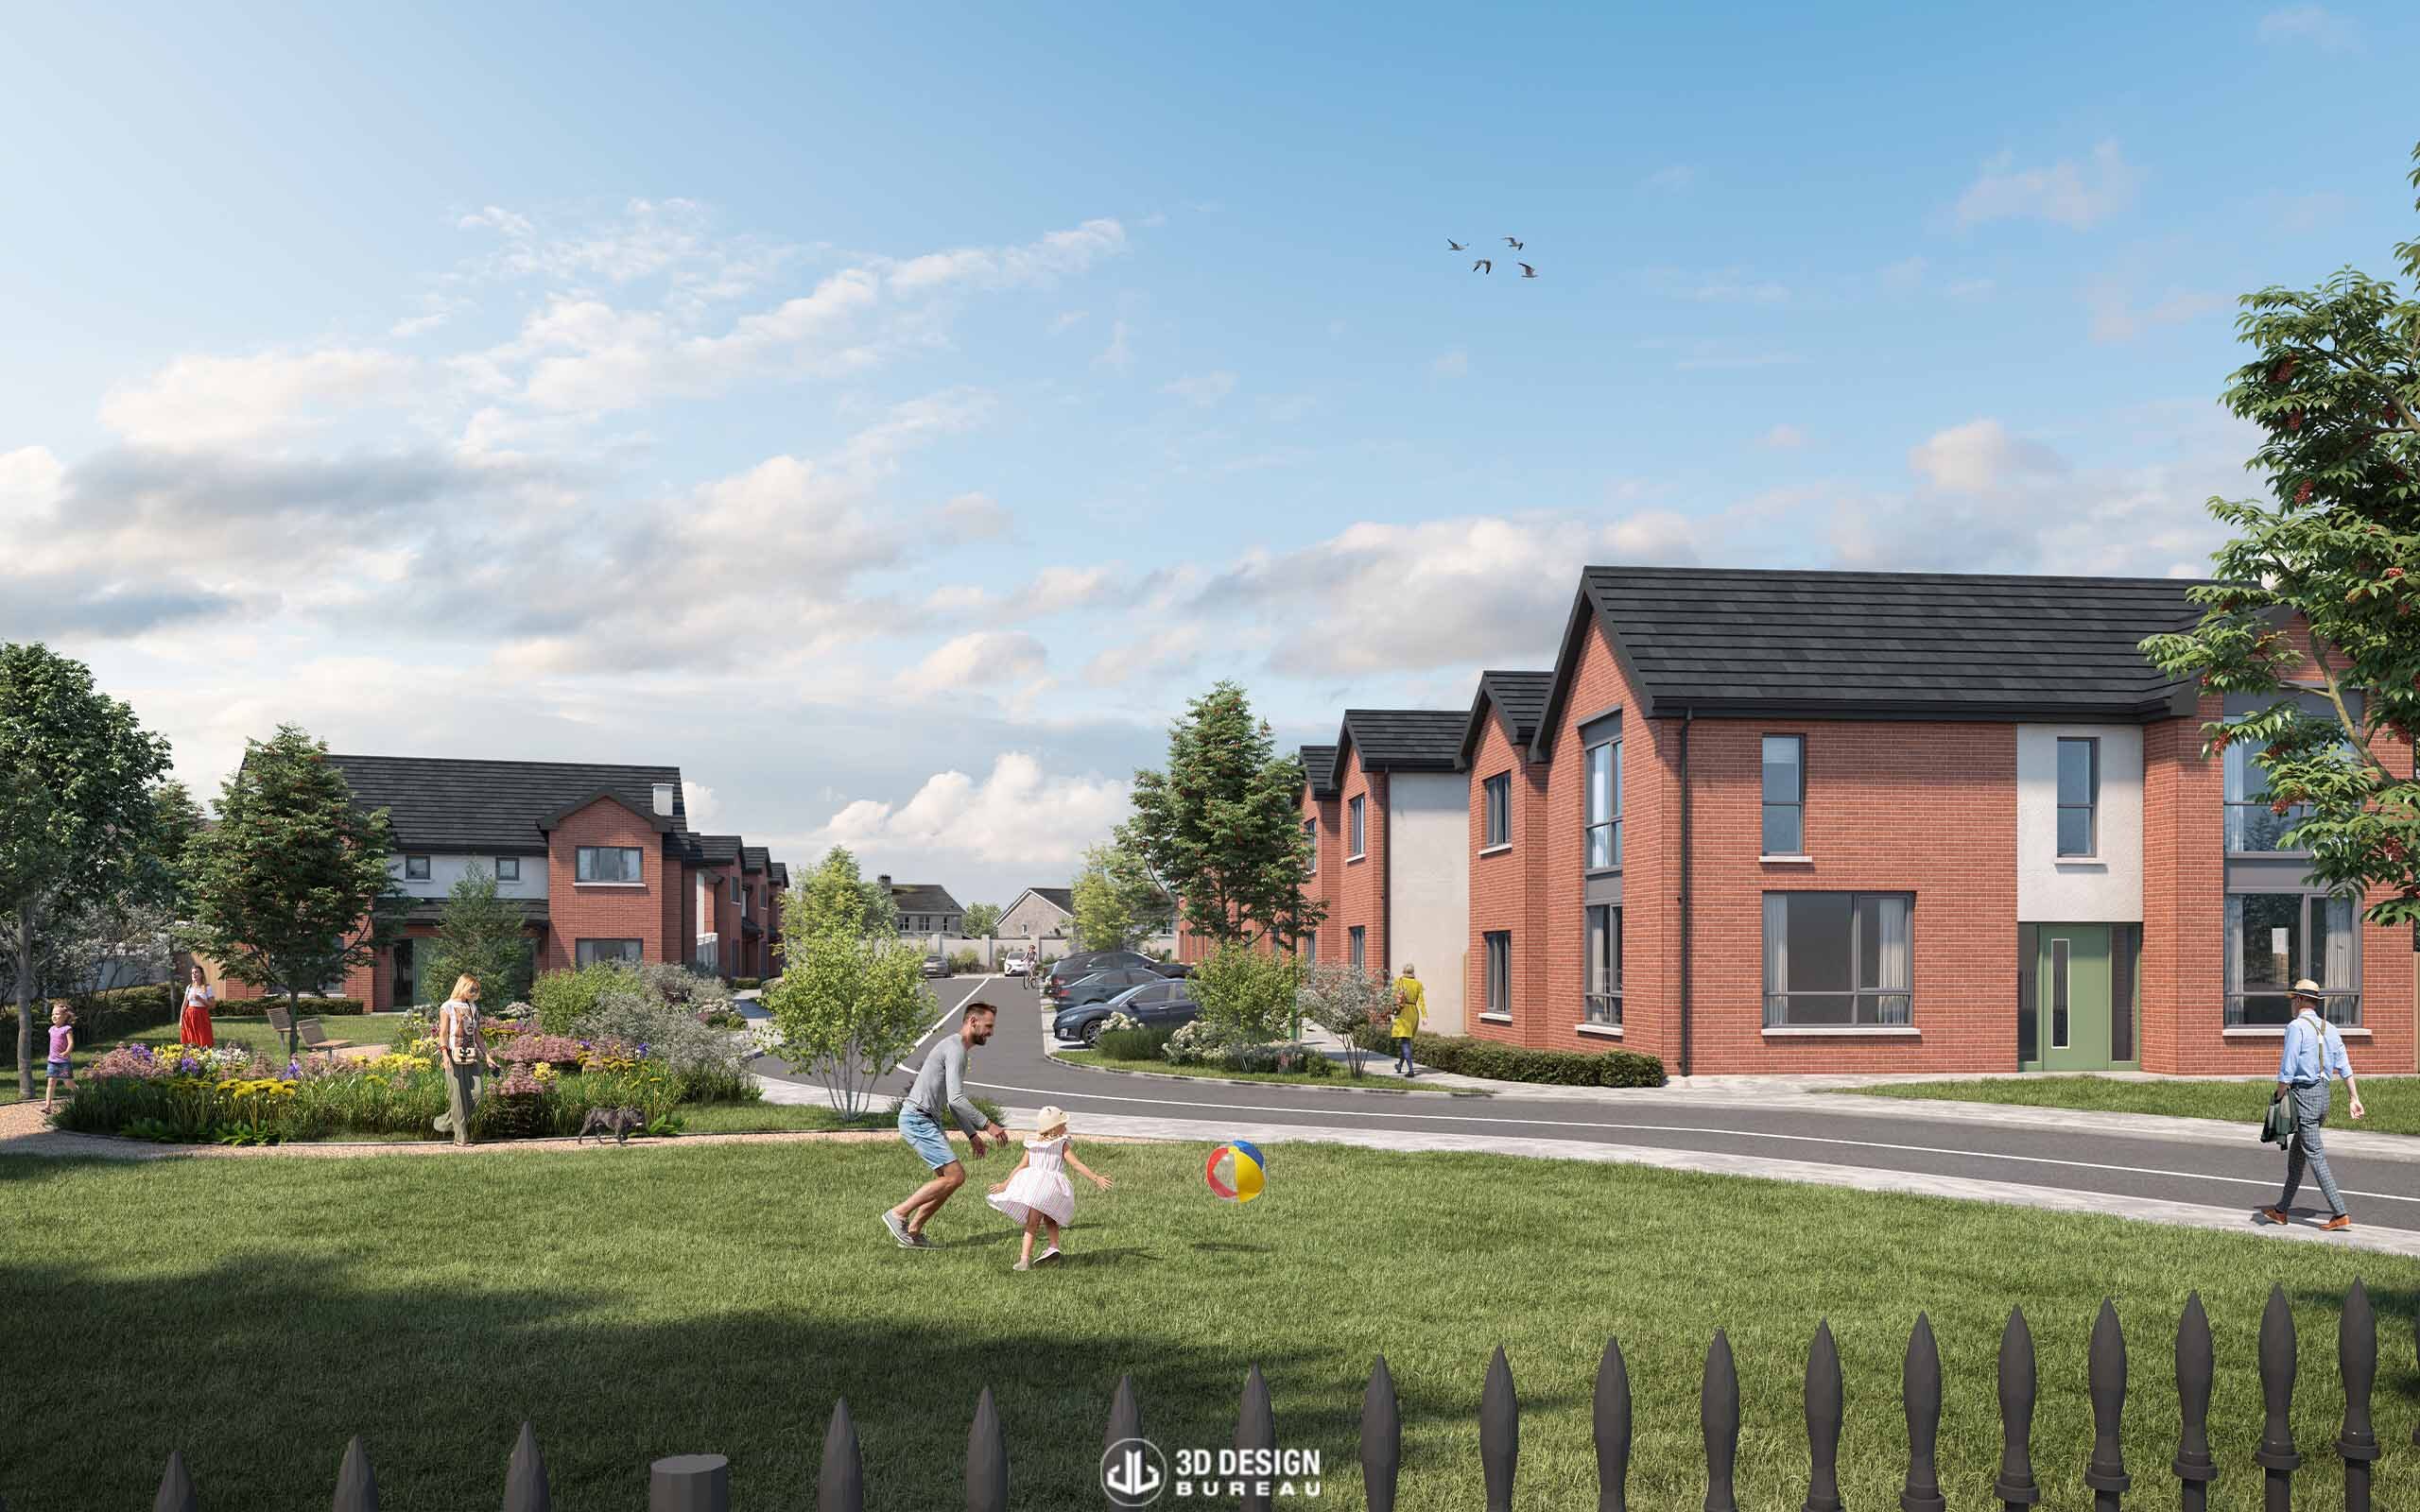 Architectural computer generated images of the proposed development in Mullingar